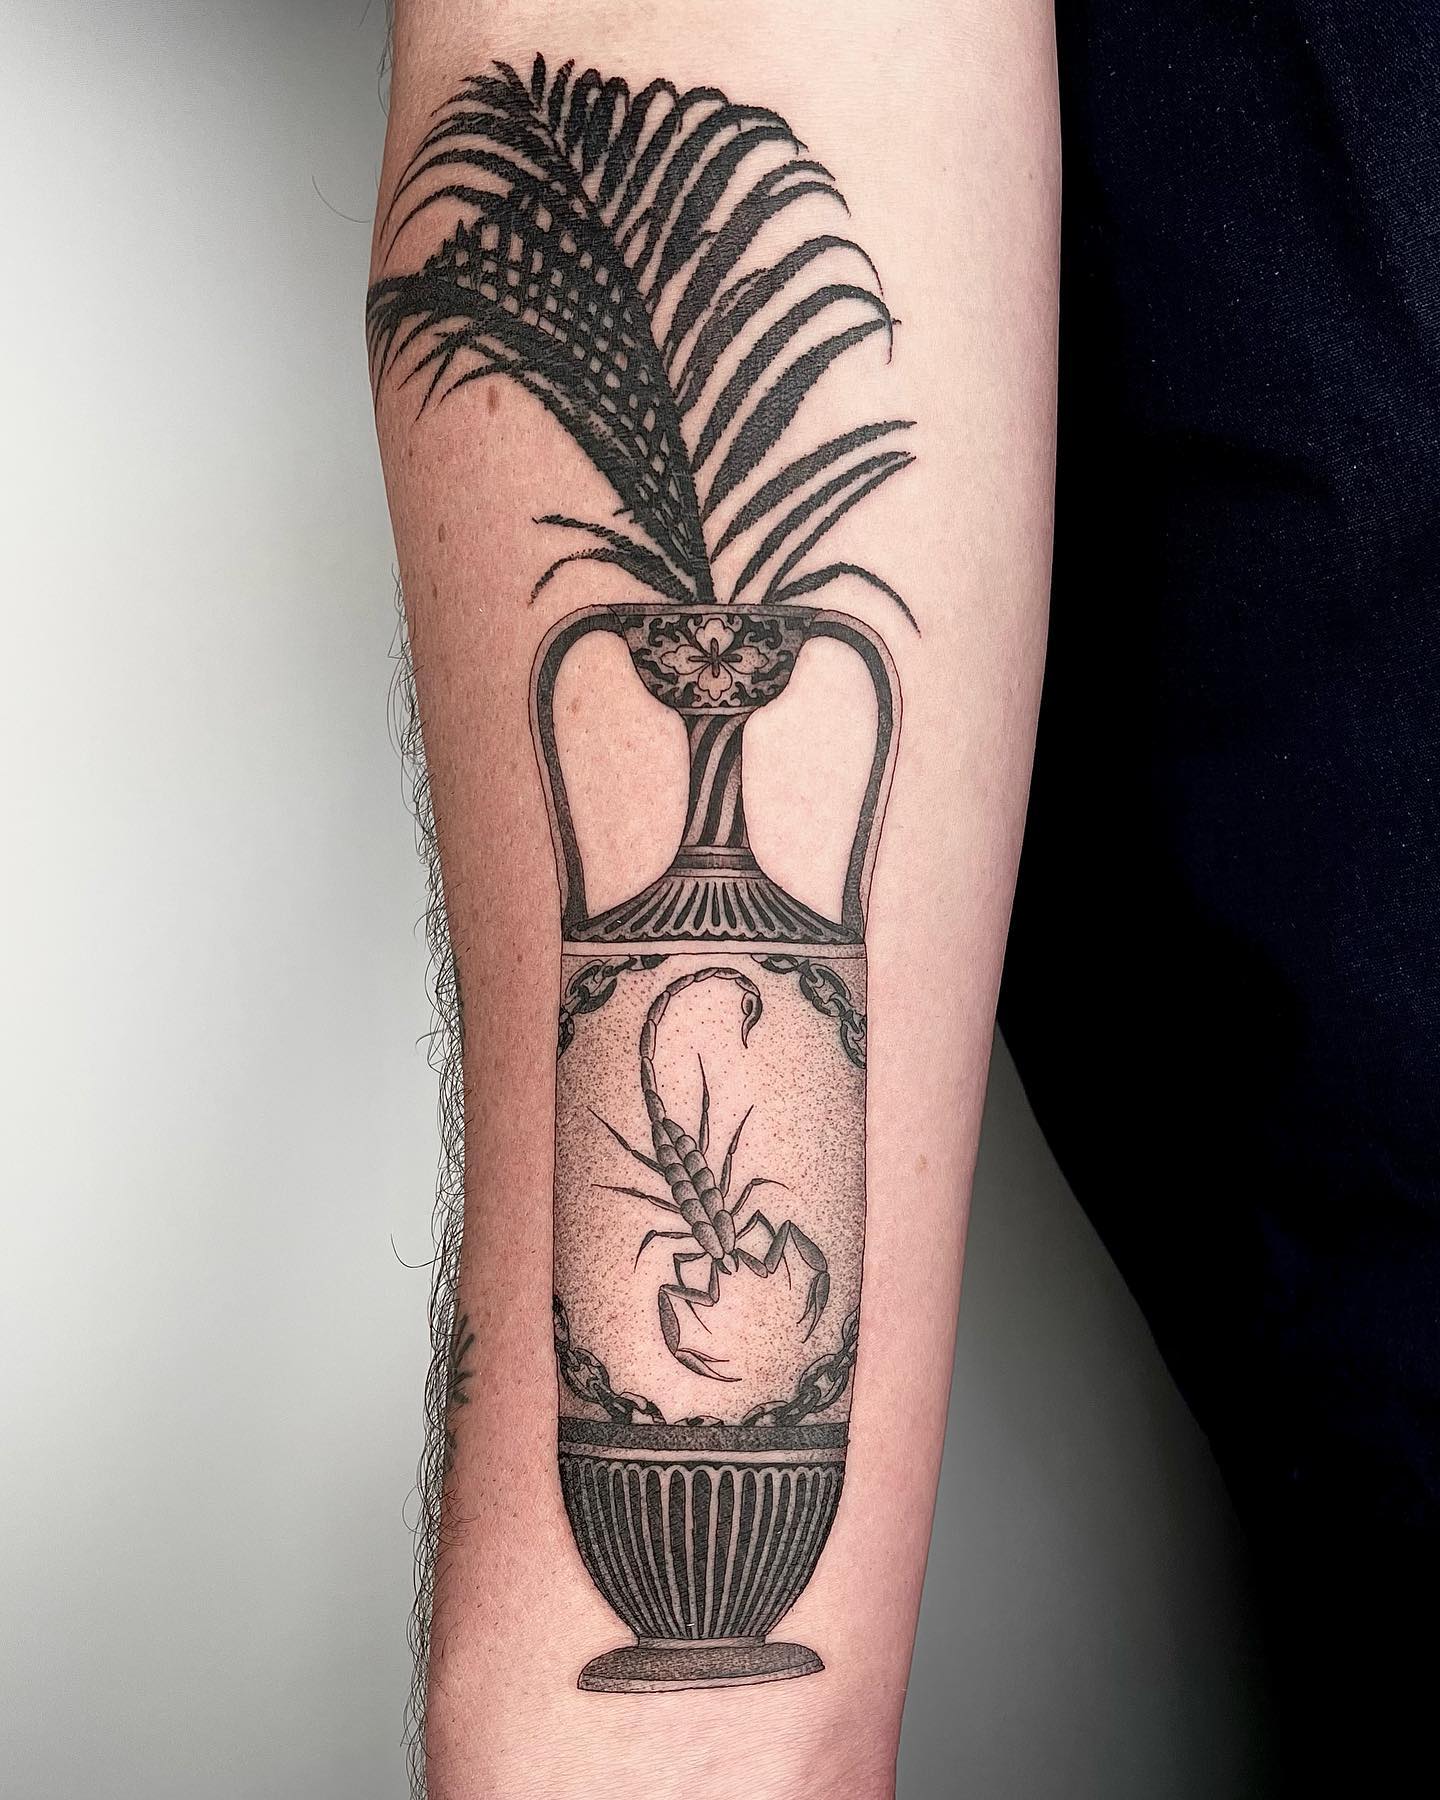 Here is an interesting design for the ones who prefer unusual tattoos. A scorpion in a vase will represent that you take everything in control.